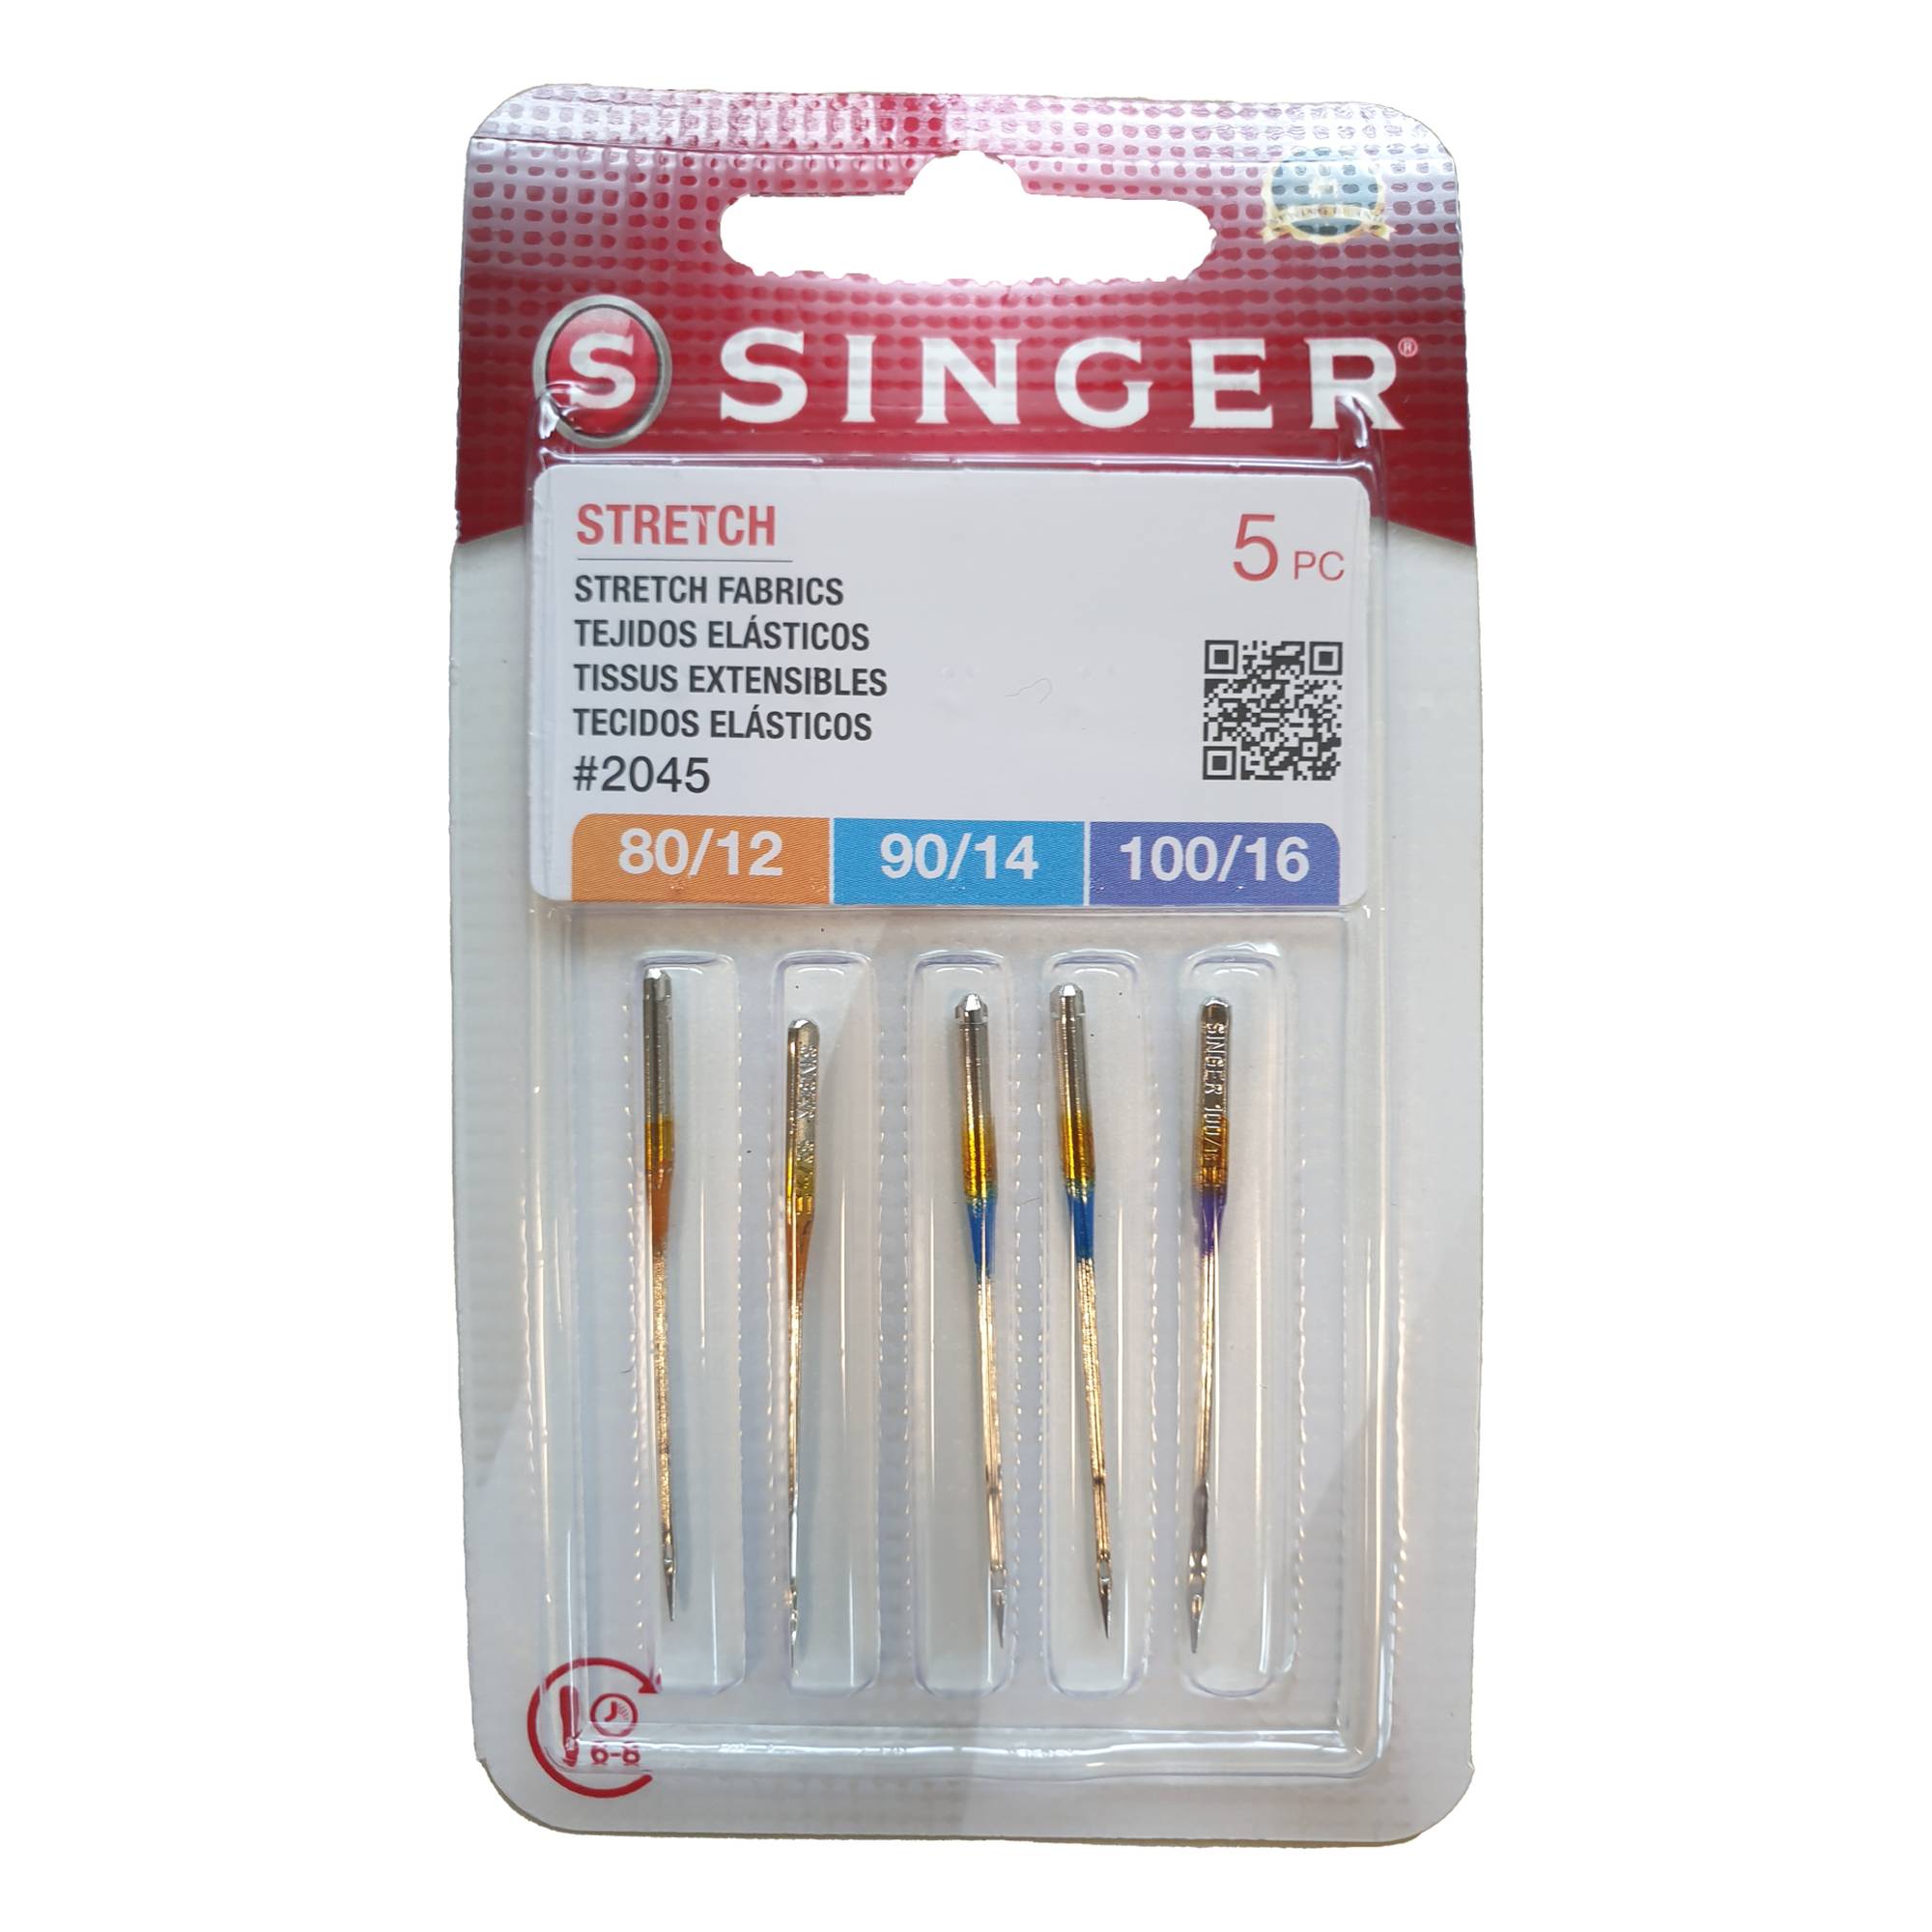 Packet of Singer Sewing Machine Needles with Normal Point in Size